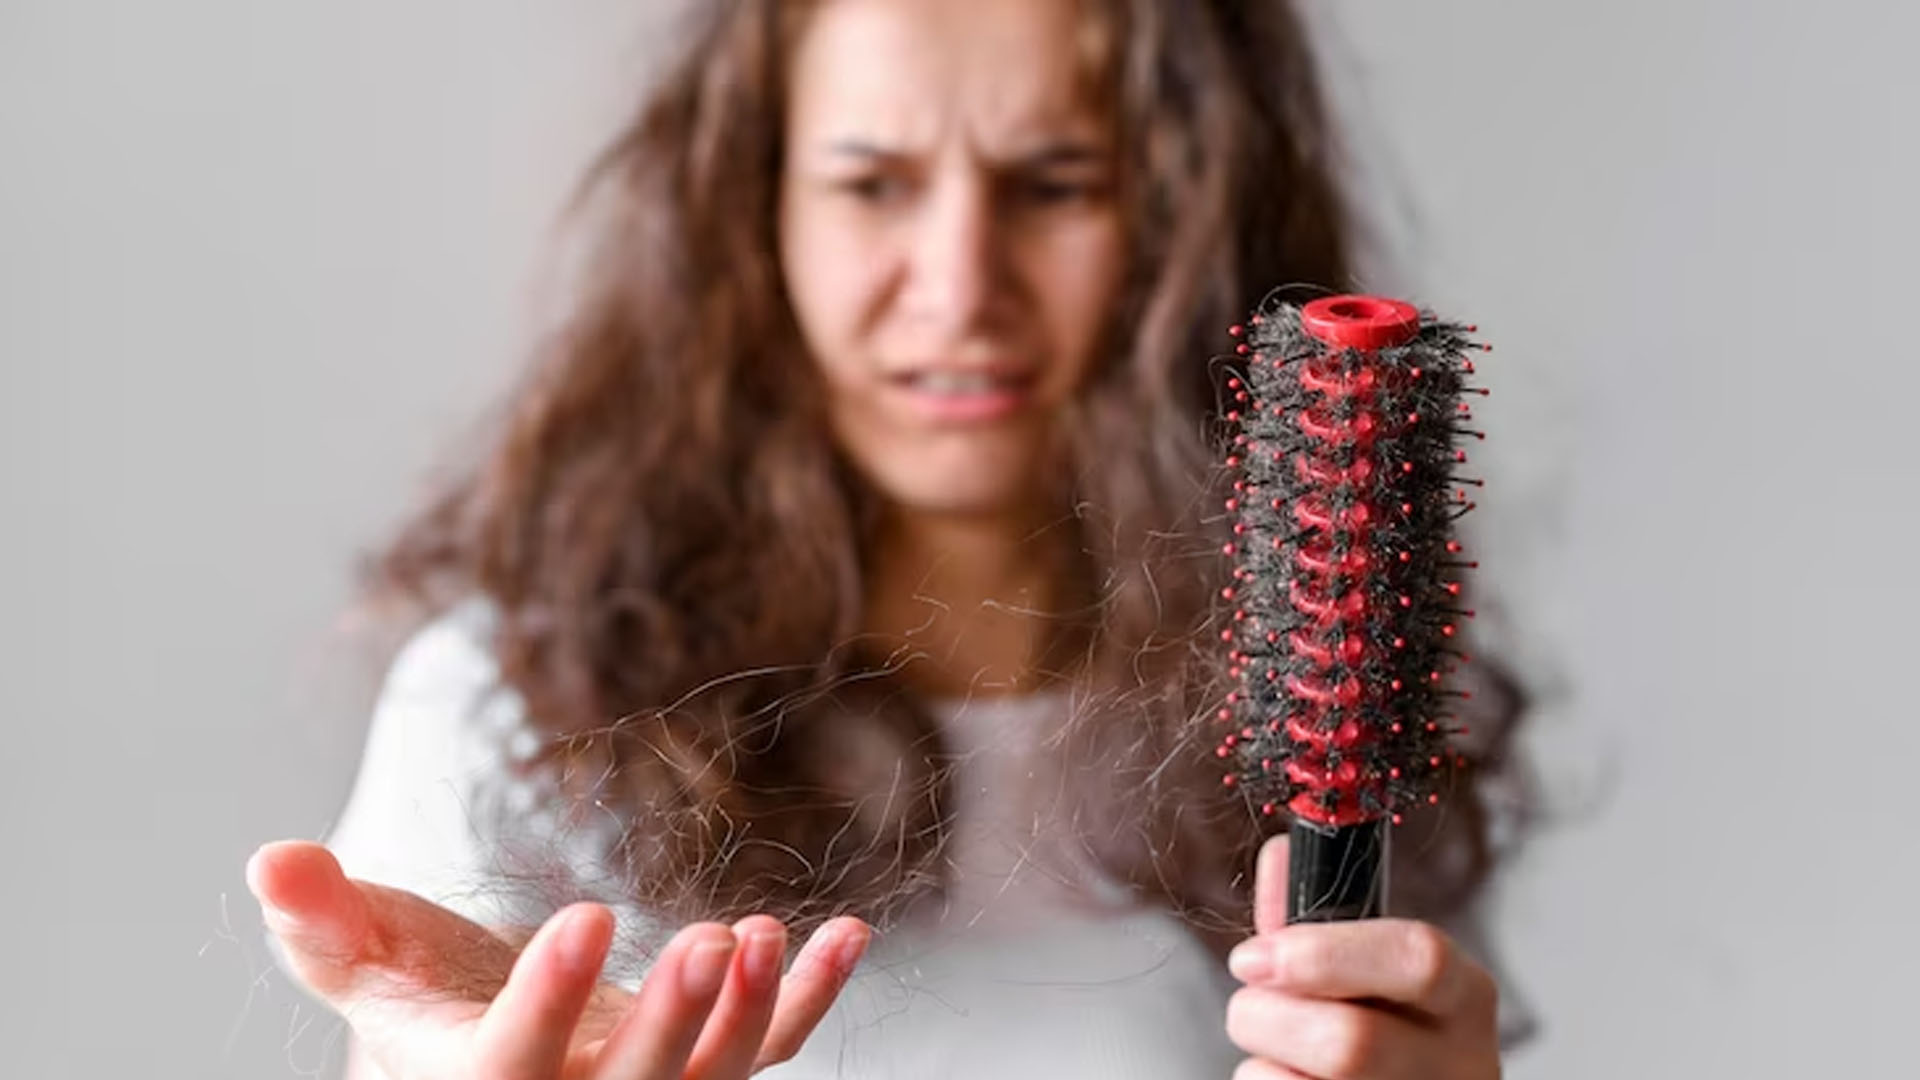 What are the Home Remedies to Prevent Hair Fall Caused by PCOS?